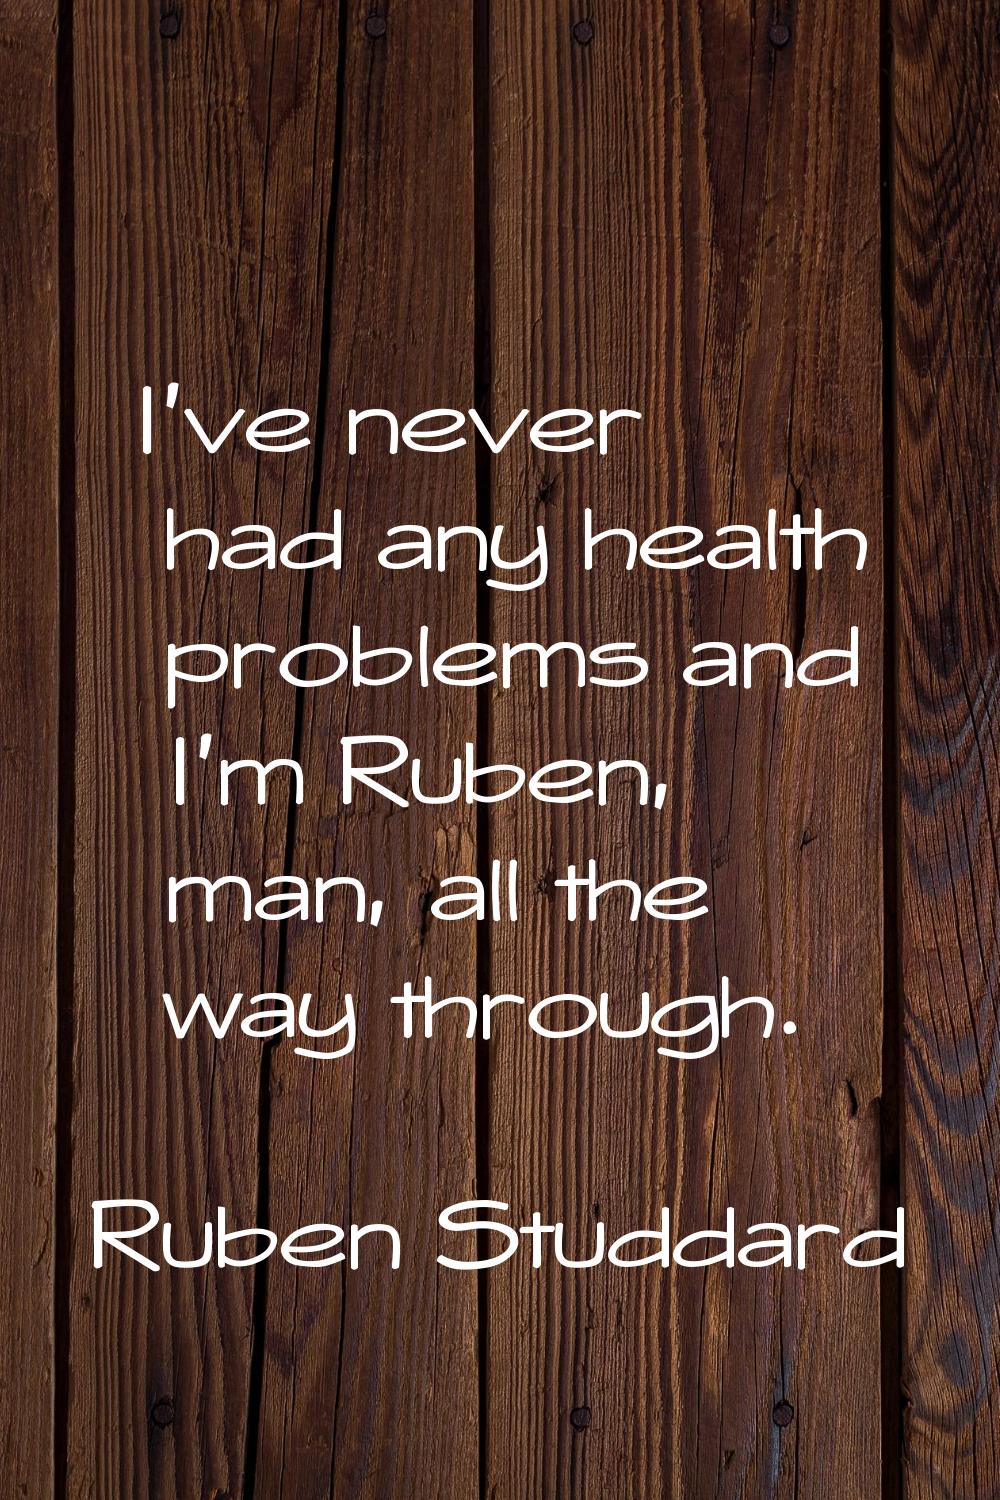 I've never had any health problems and I'm Ruben, man, all the way through.